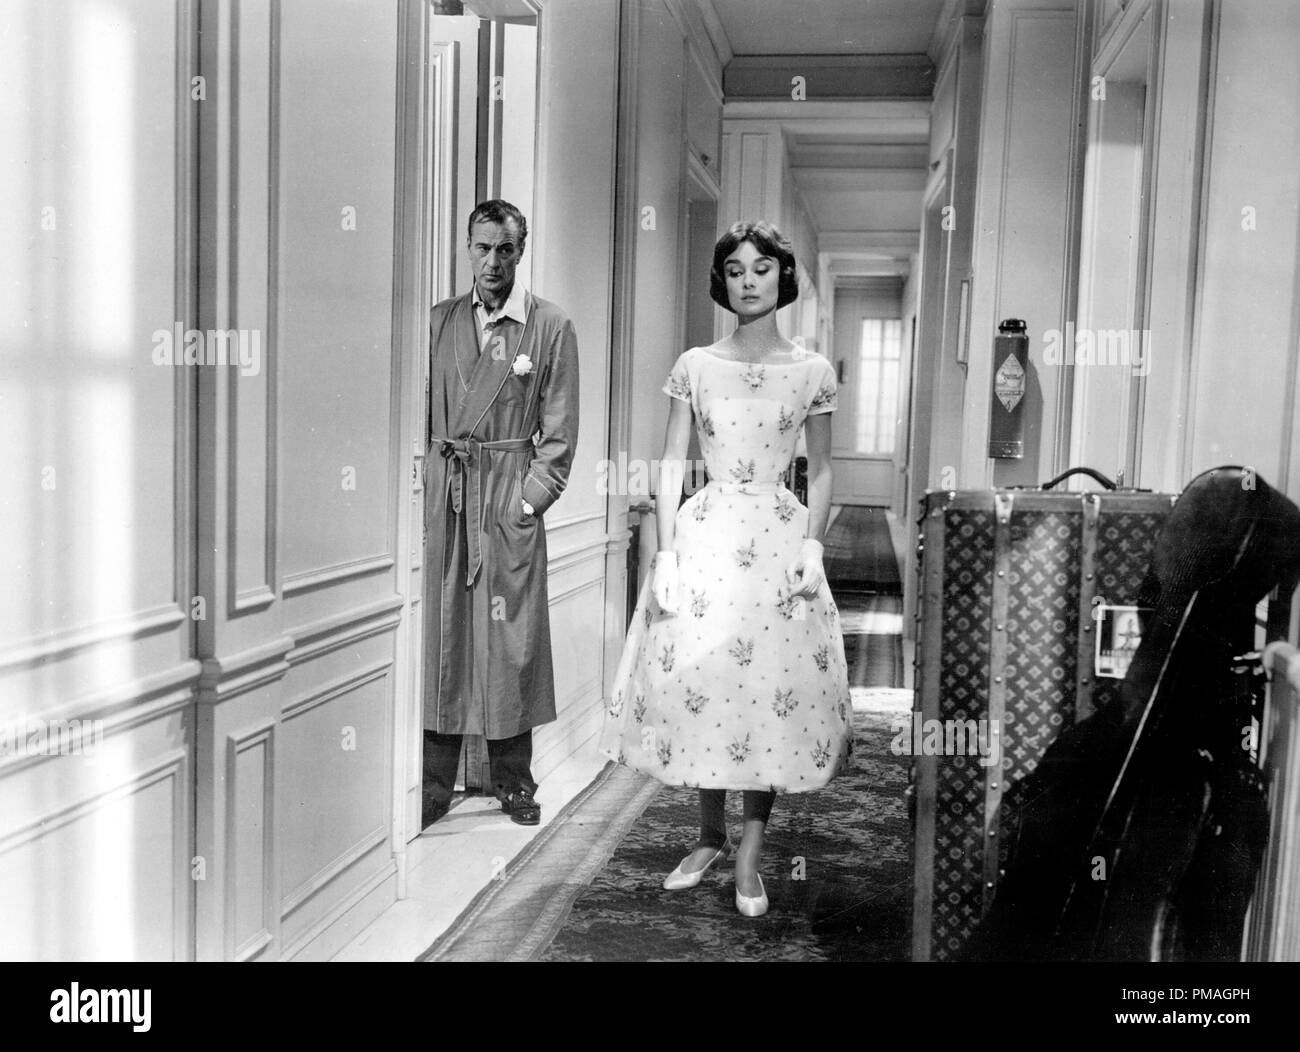 Gary Cooper, Audrey Hepburn Love in the Afternoon 1957 Allied Artists  File Reference # 32733 231THA Stock Photo - Alamy